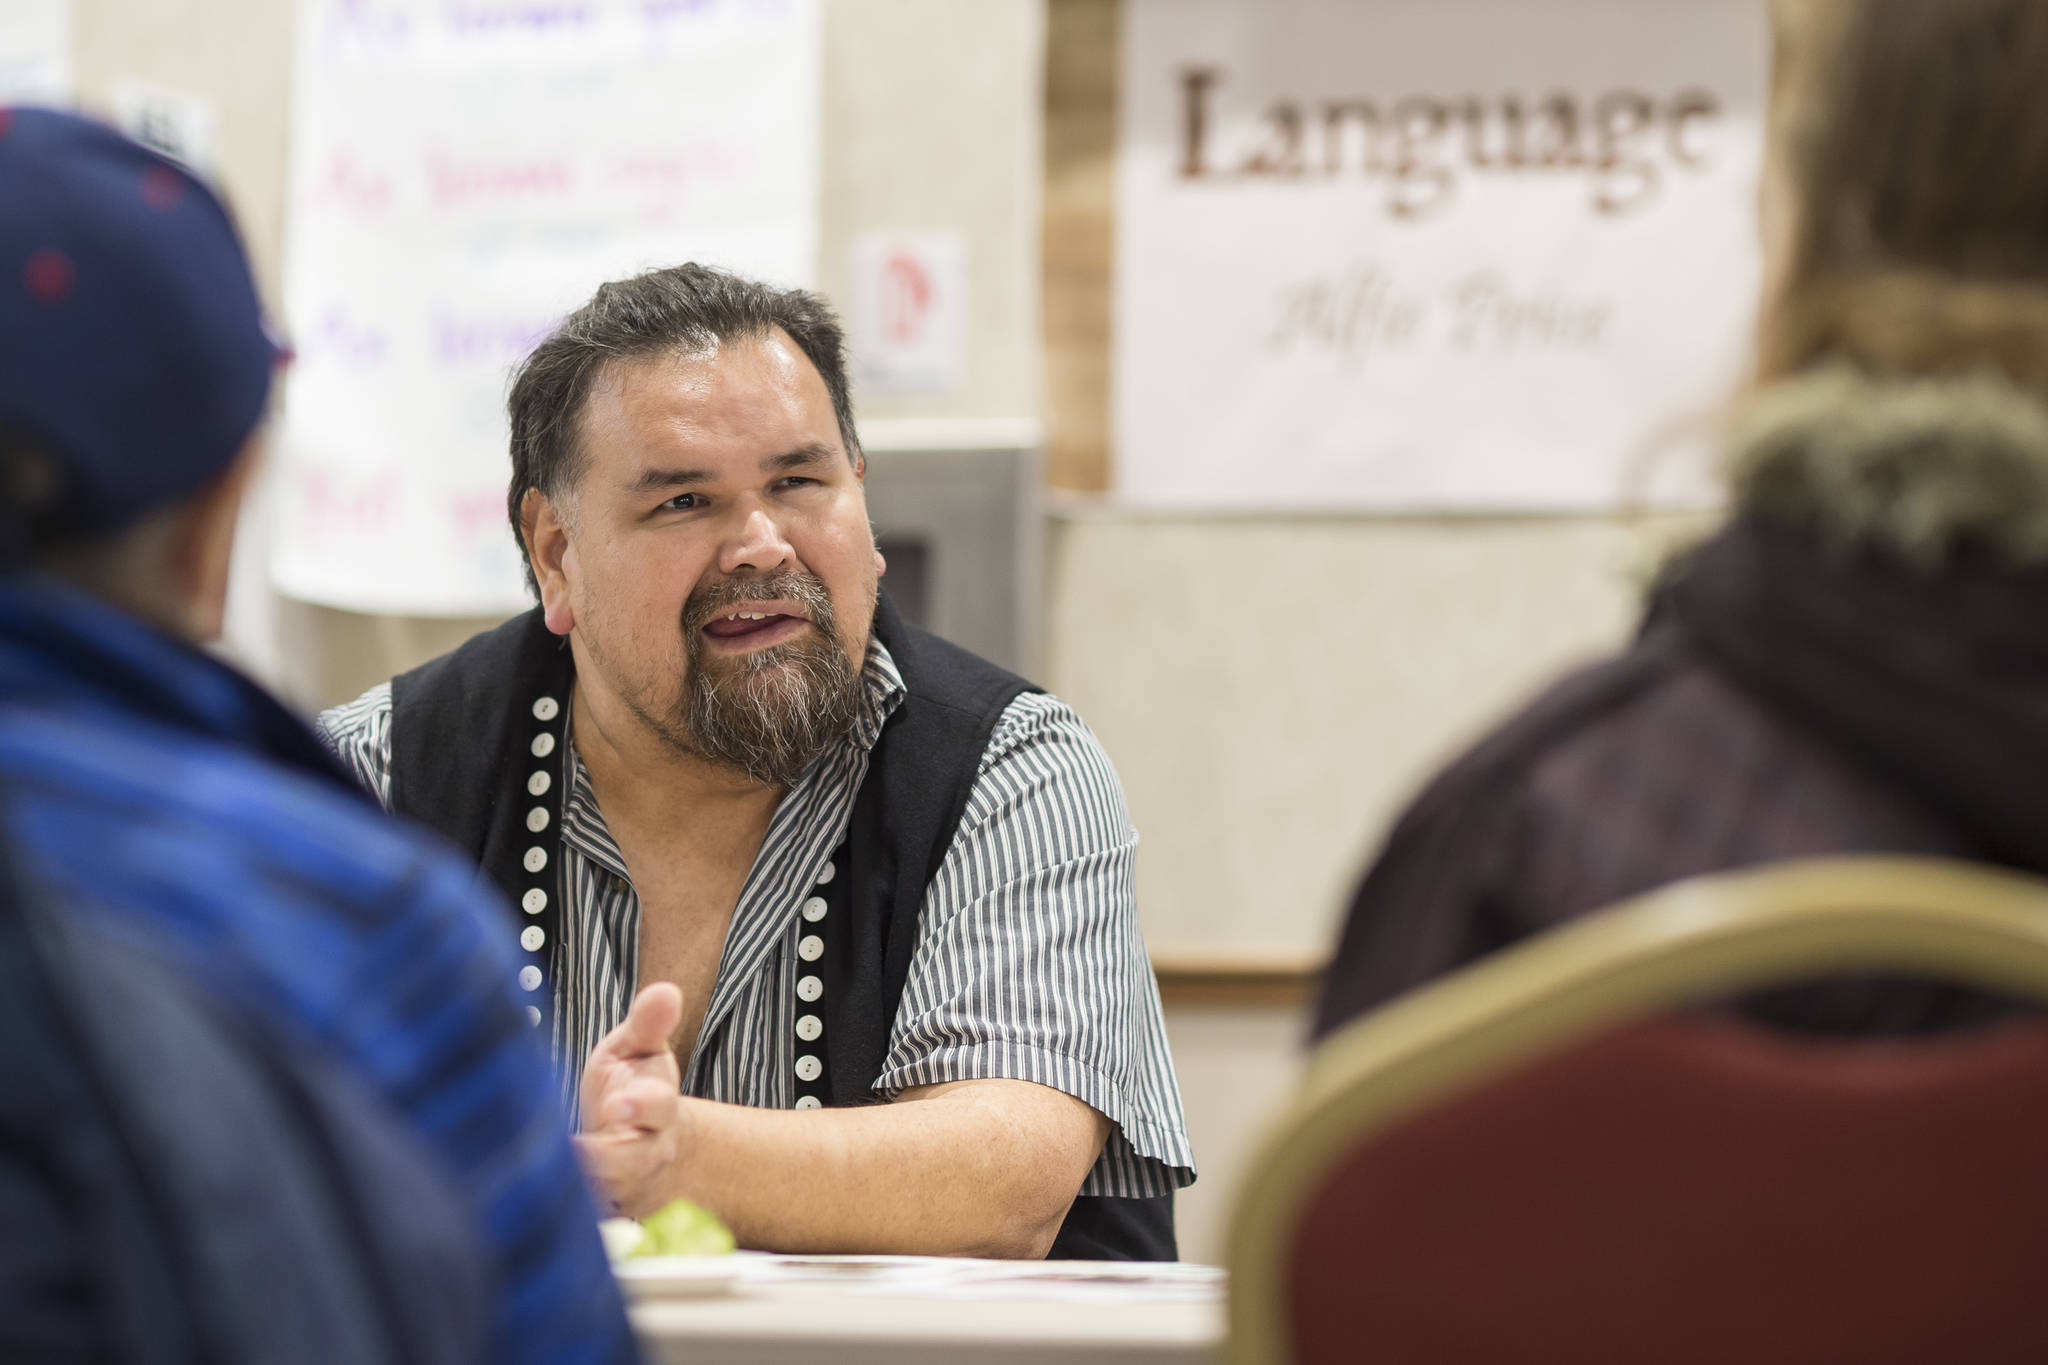 Alfie Price discusses Native languages at Celebrating Our Ways of Life for Native American Heritage Month at the Elizabeth Peratrovich Hall on Friday, Nov. 16, 2018. (Michael Penn | Juneau Empire)